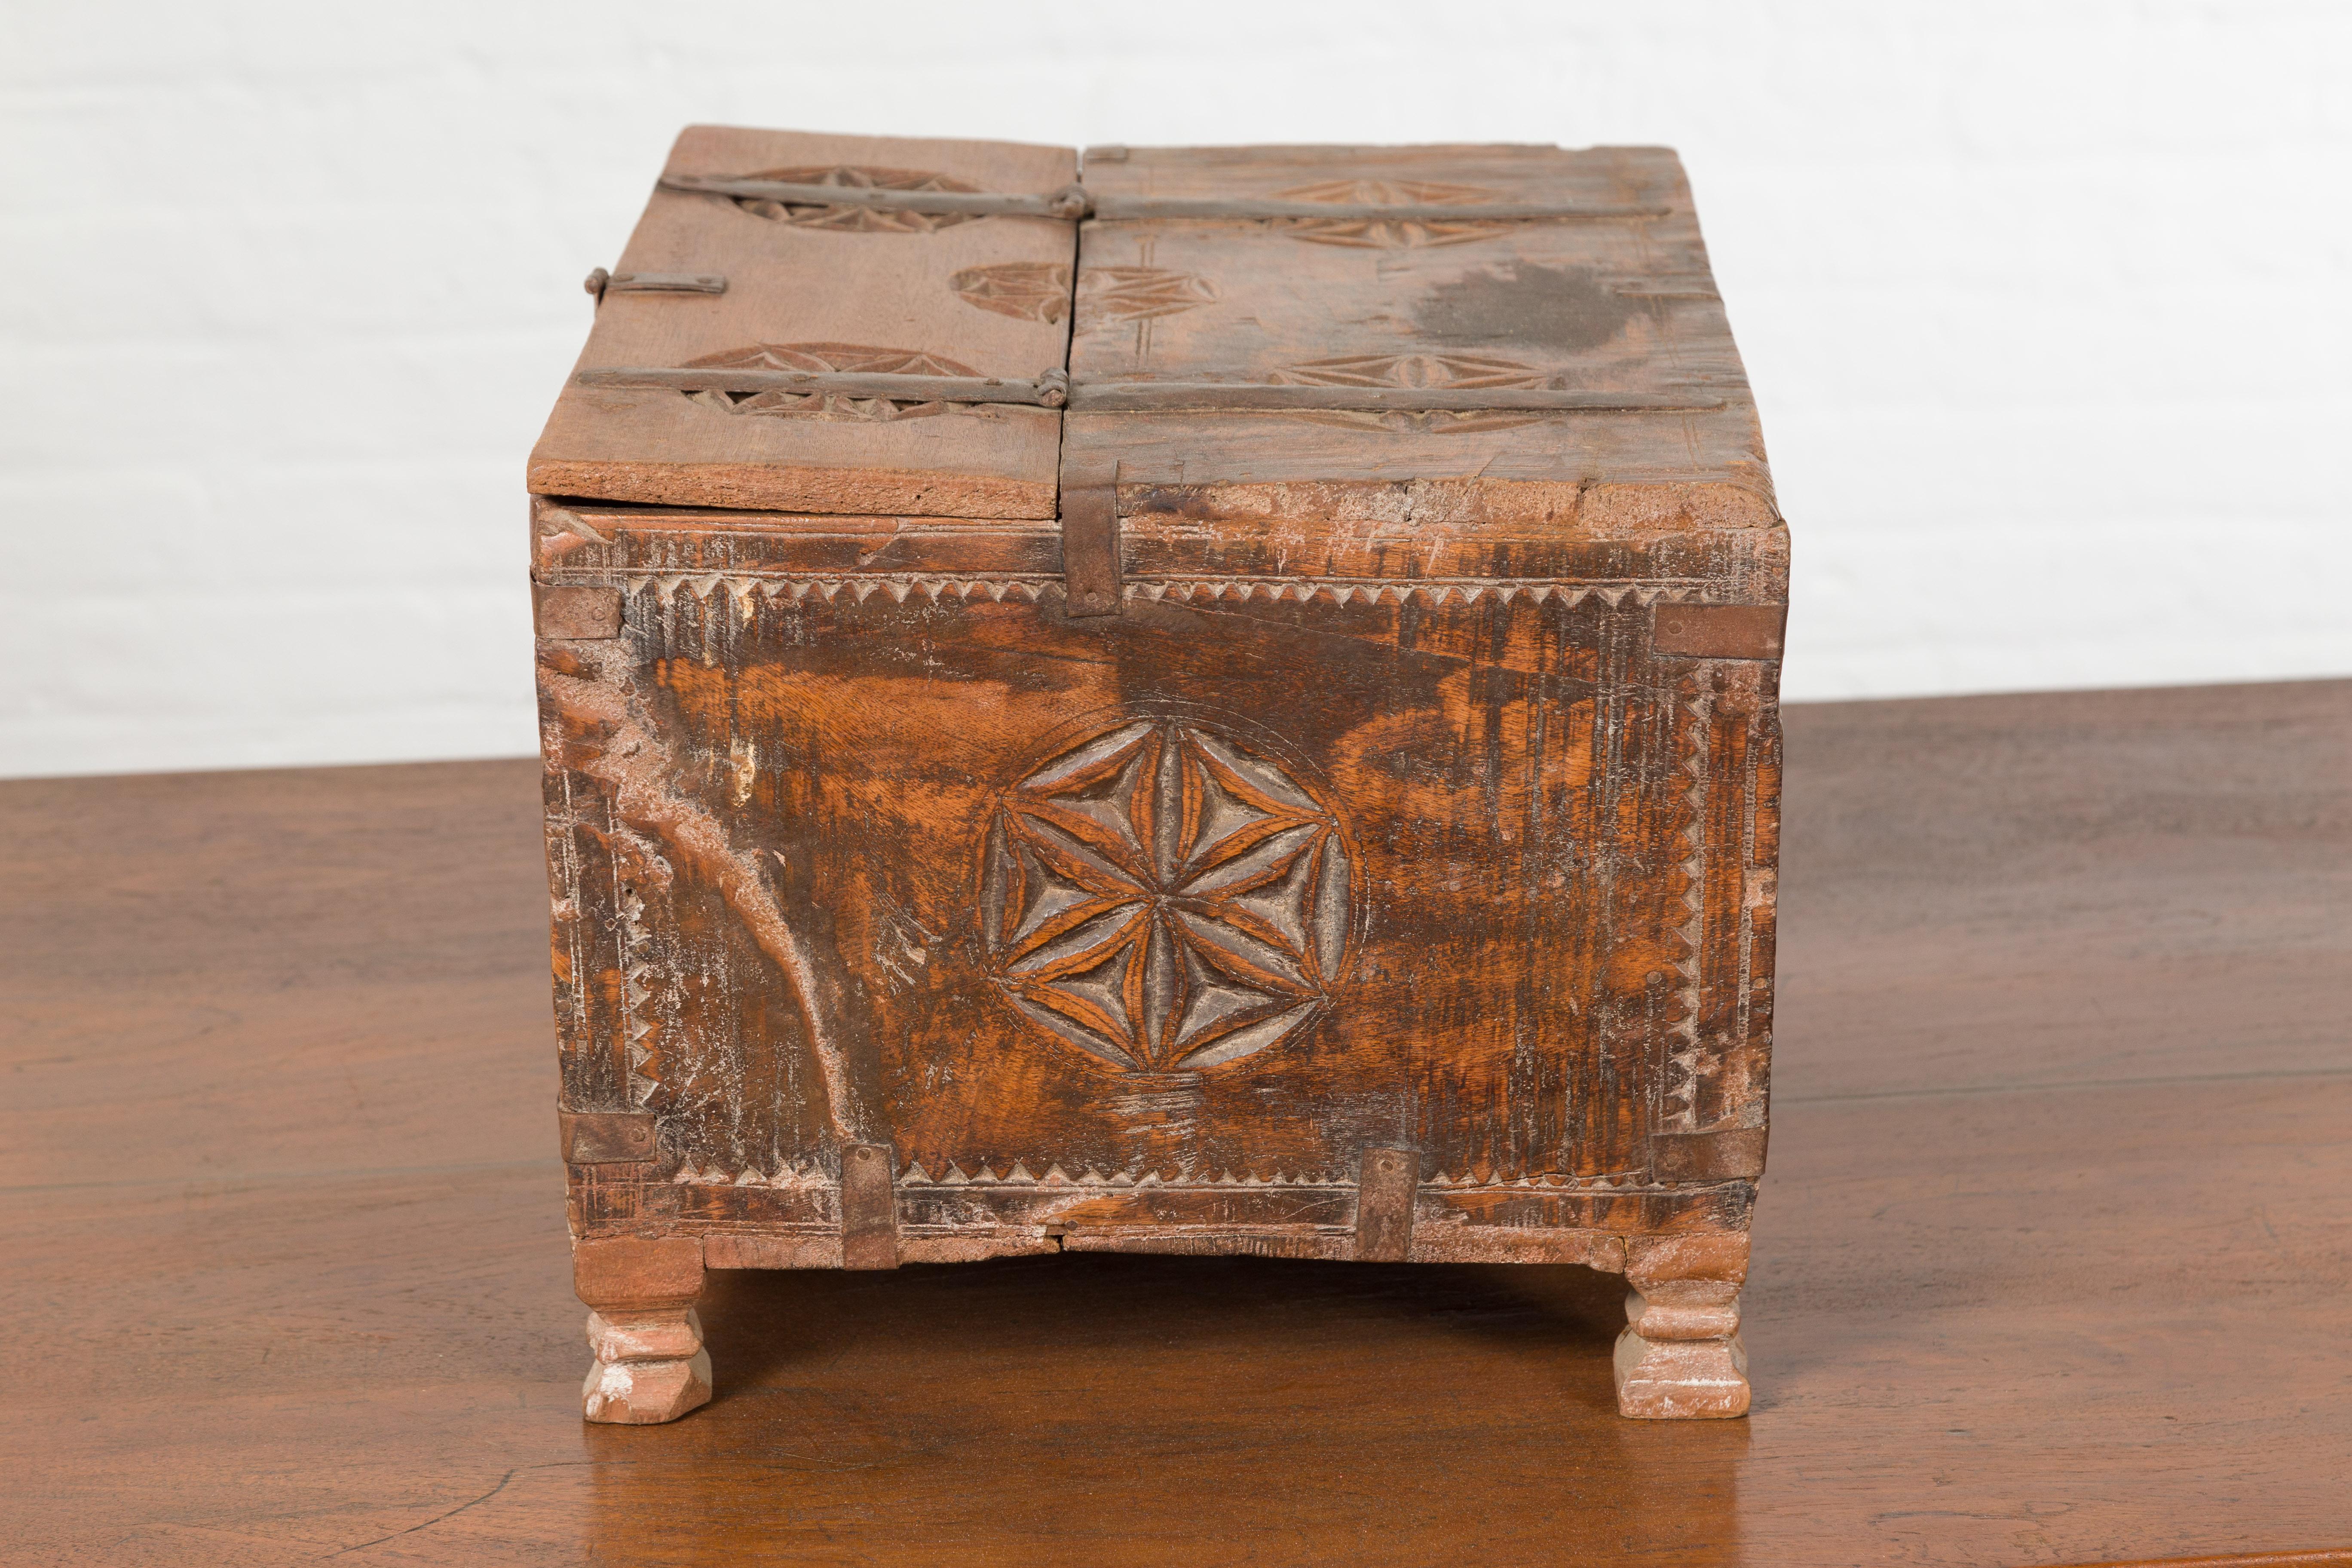 Indian 19th Century Small Wooden Box with Iron Hardware and Carved Rosacea For Sale 9